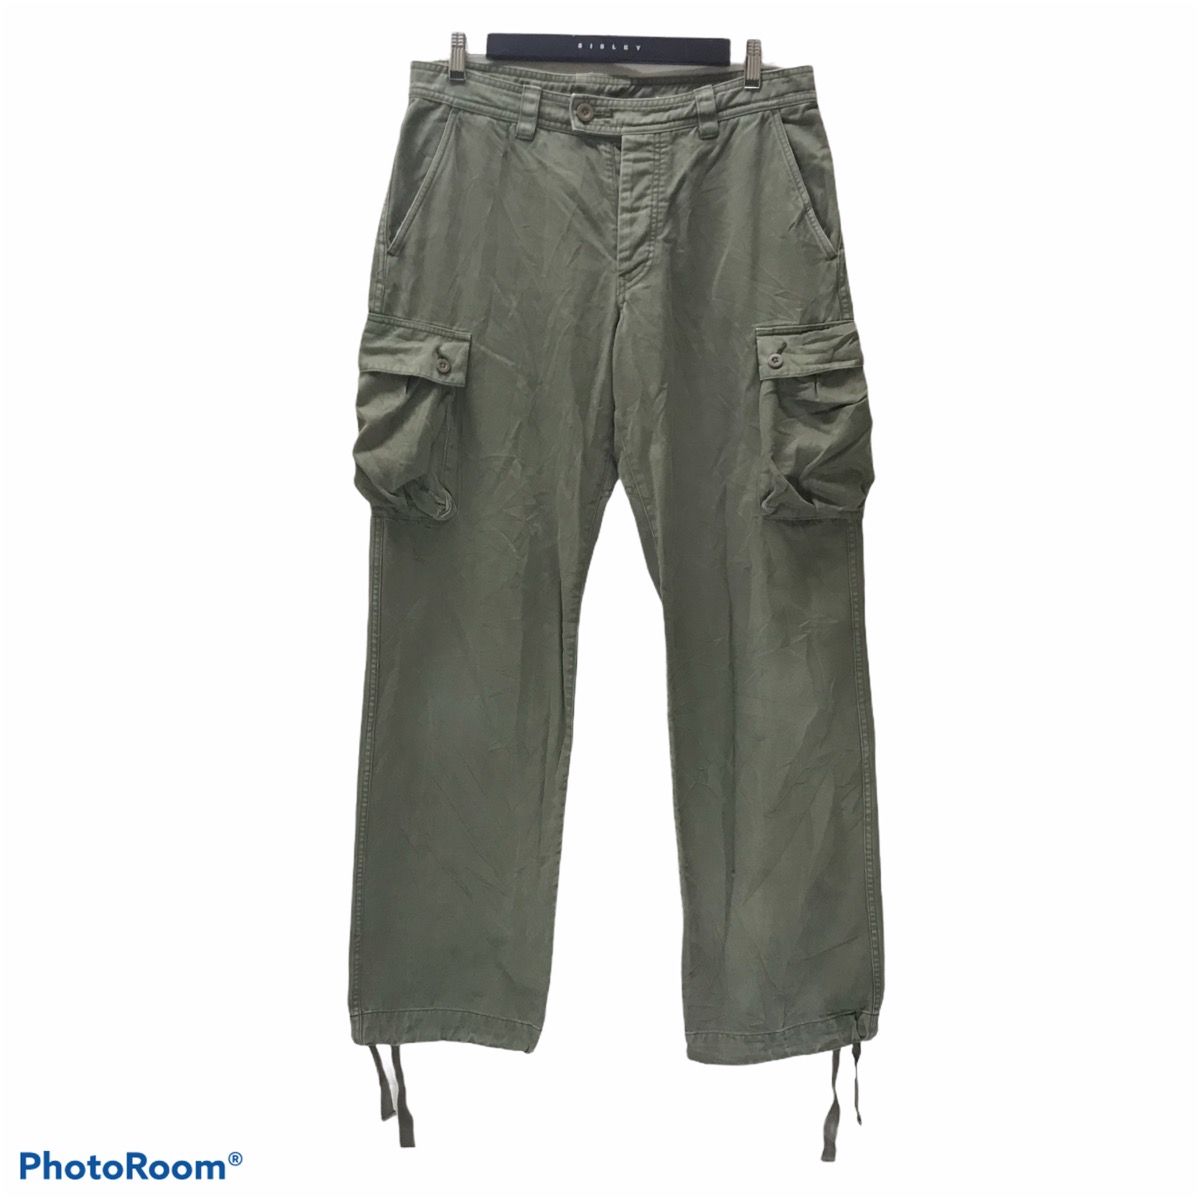 Margaret Howell MHL by Margaret Howell Cargo Pants Funtion And Utility Size US 34 / EU 50 - 1 Preview